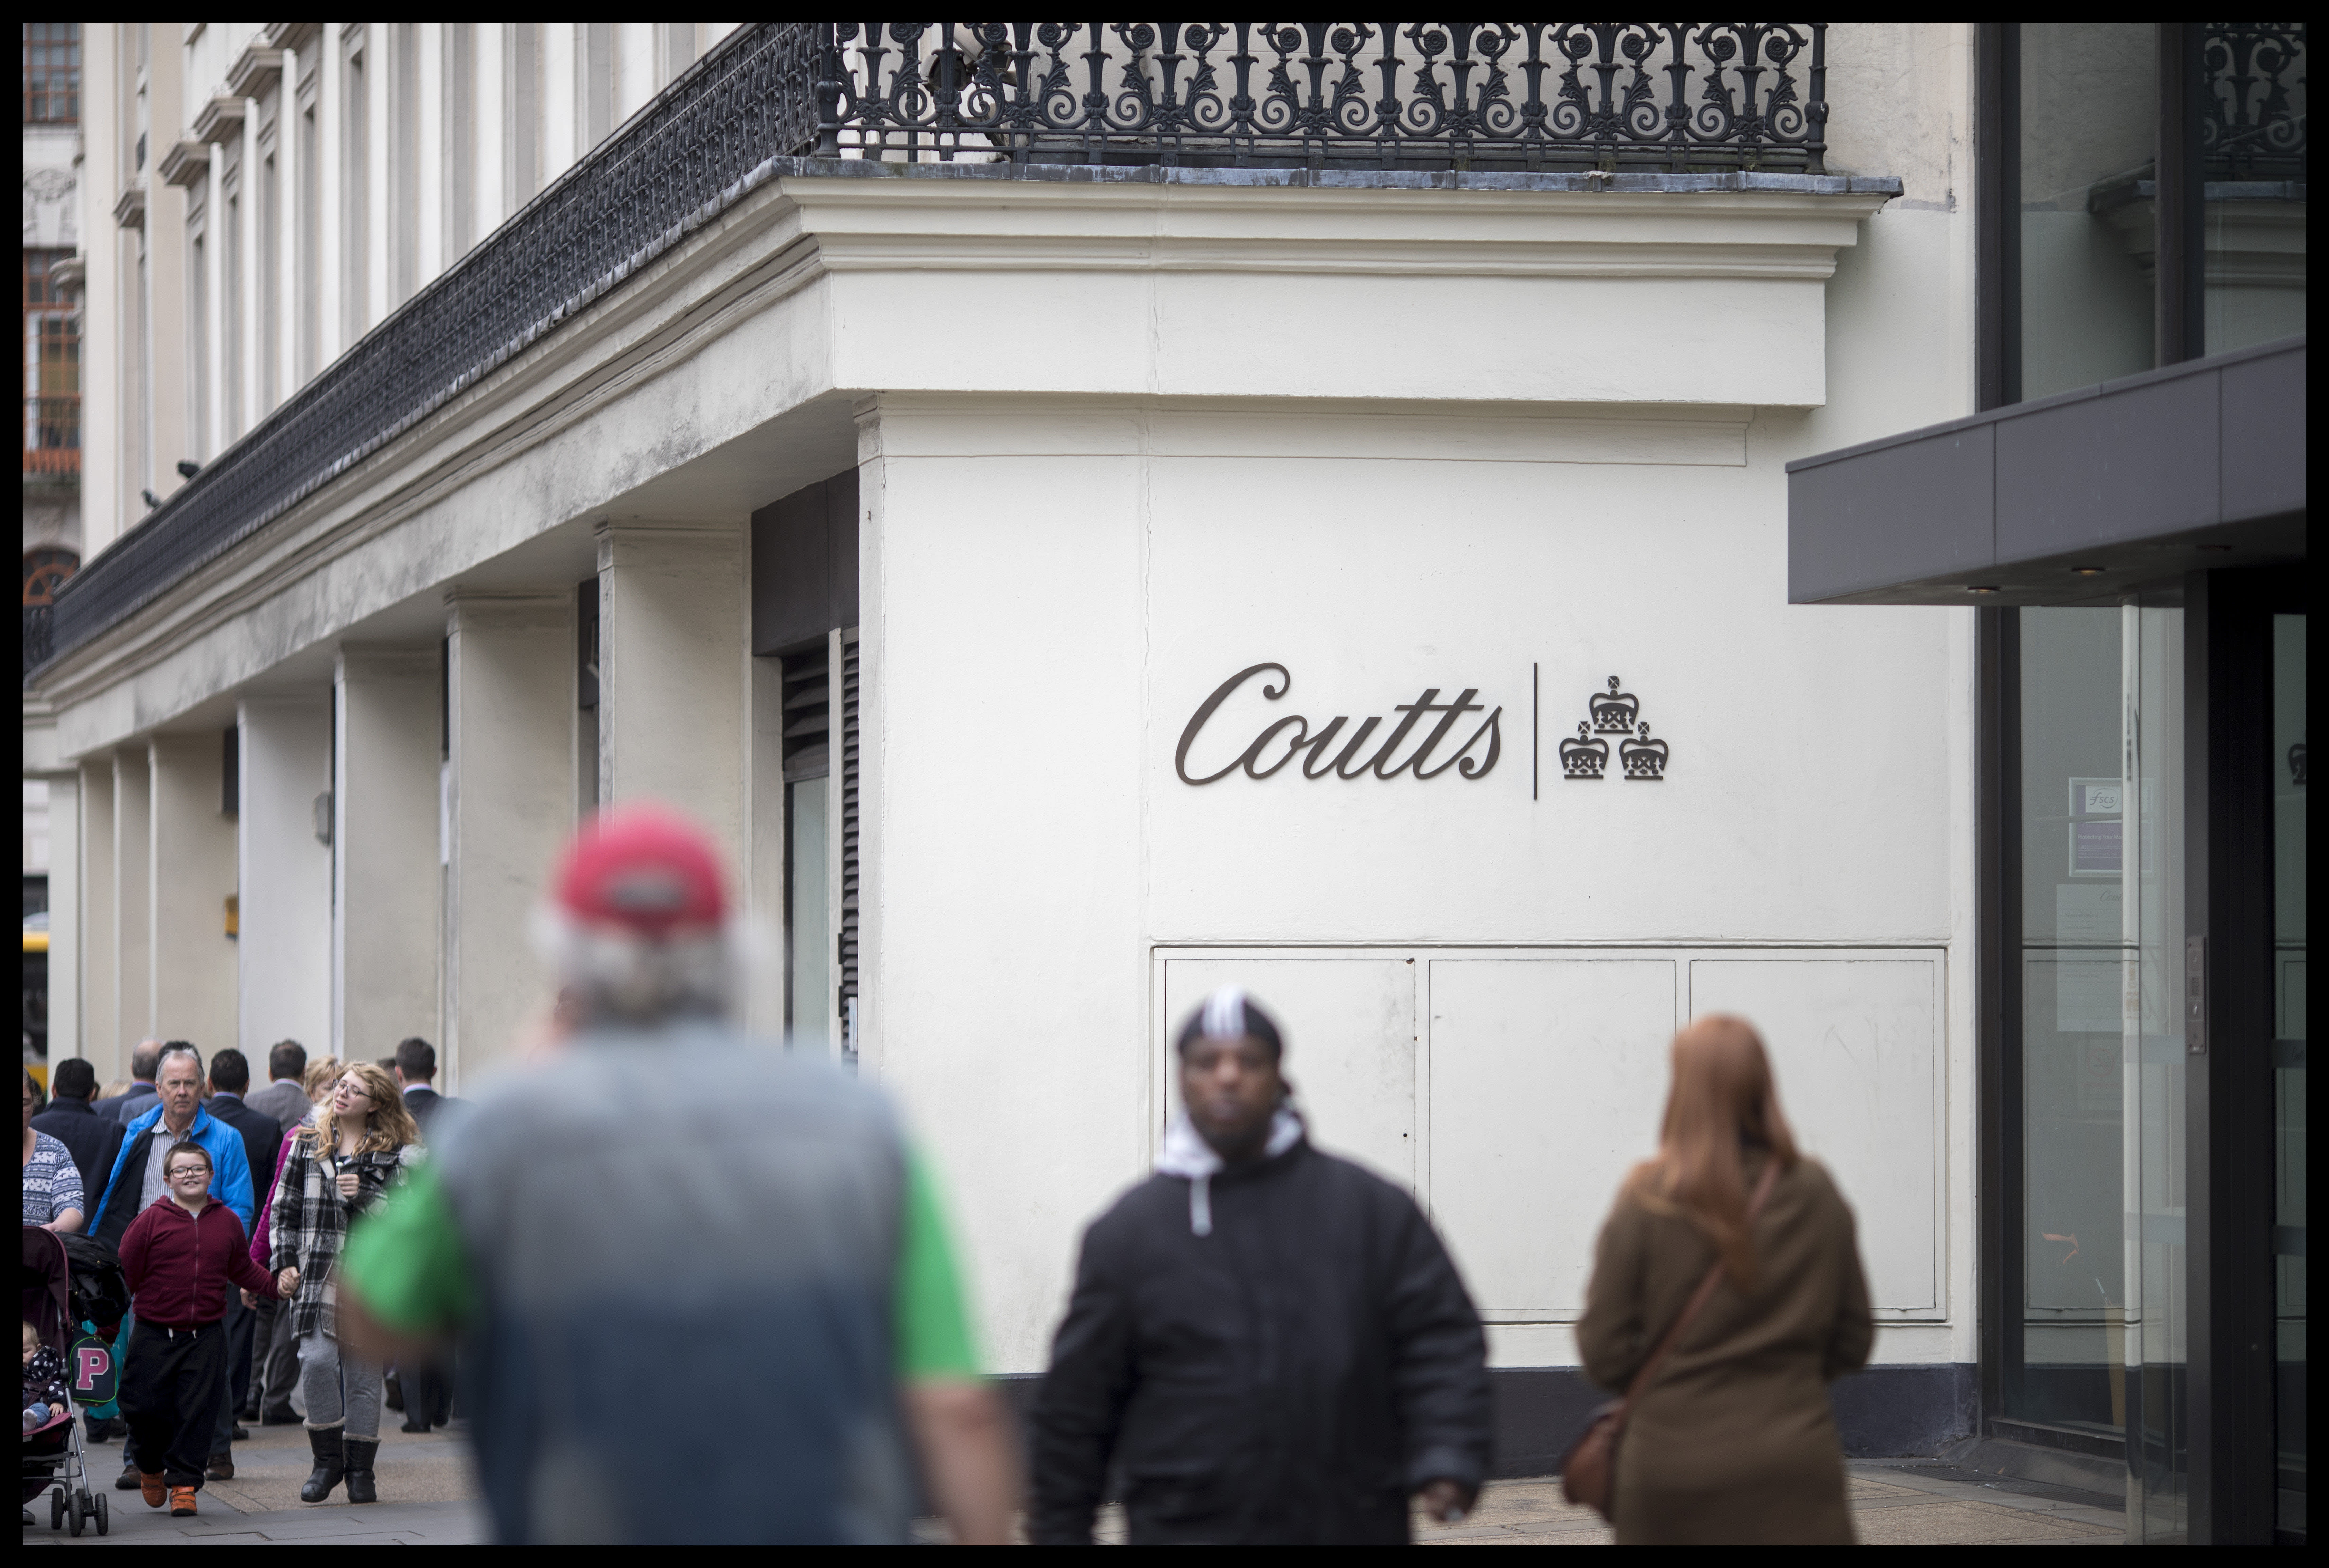 Coutts exec: We will not acquire firms at expense of service levels